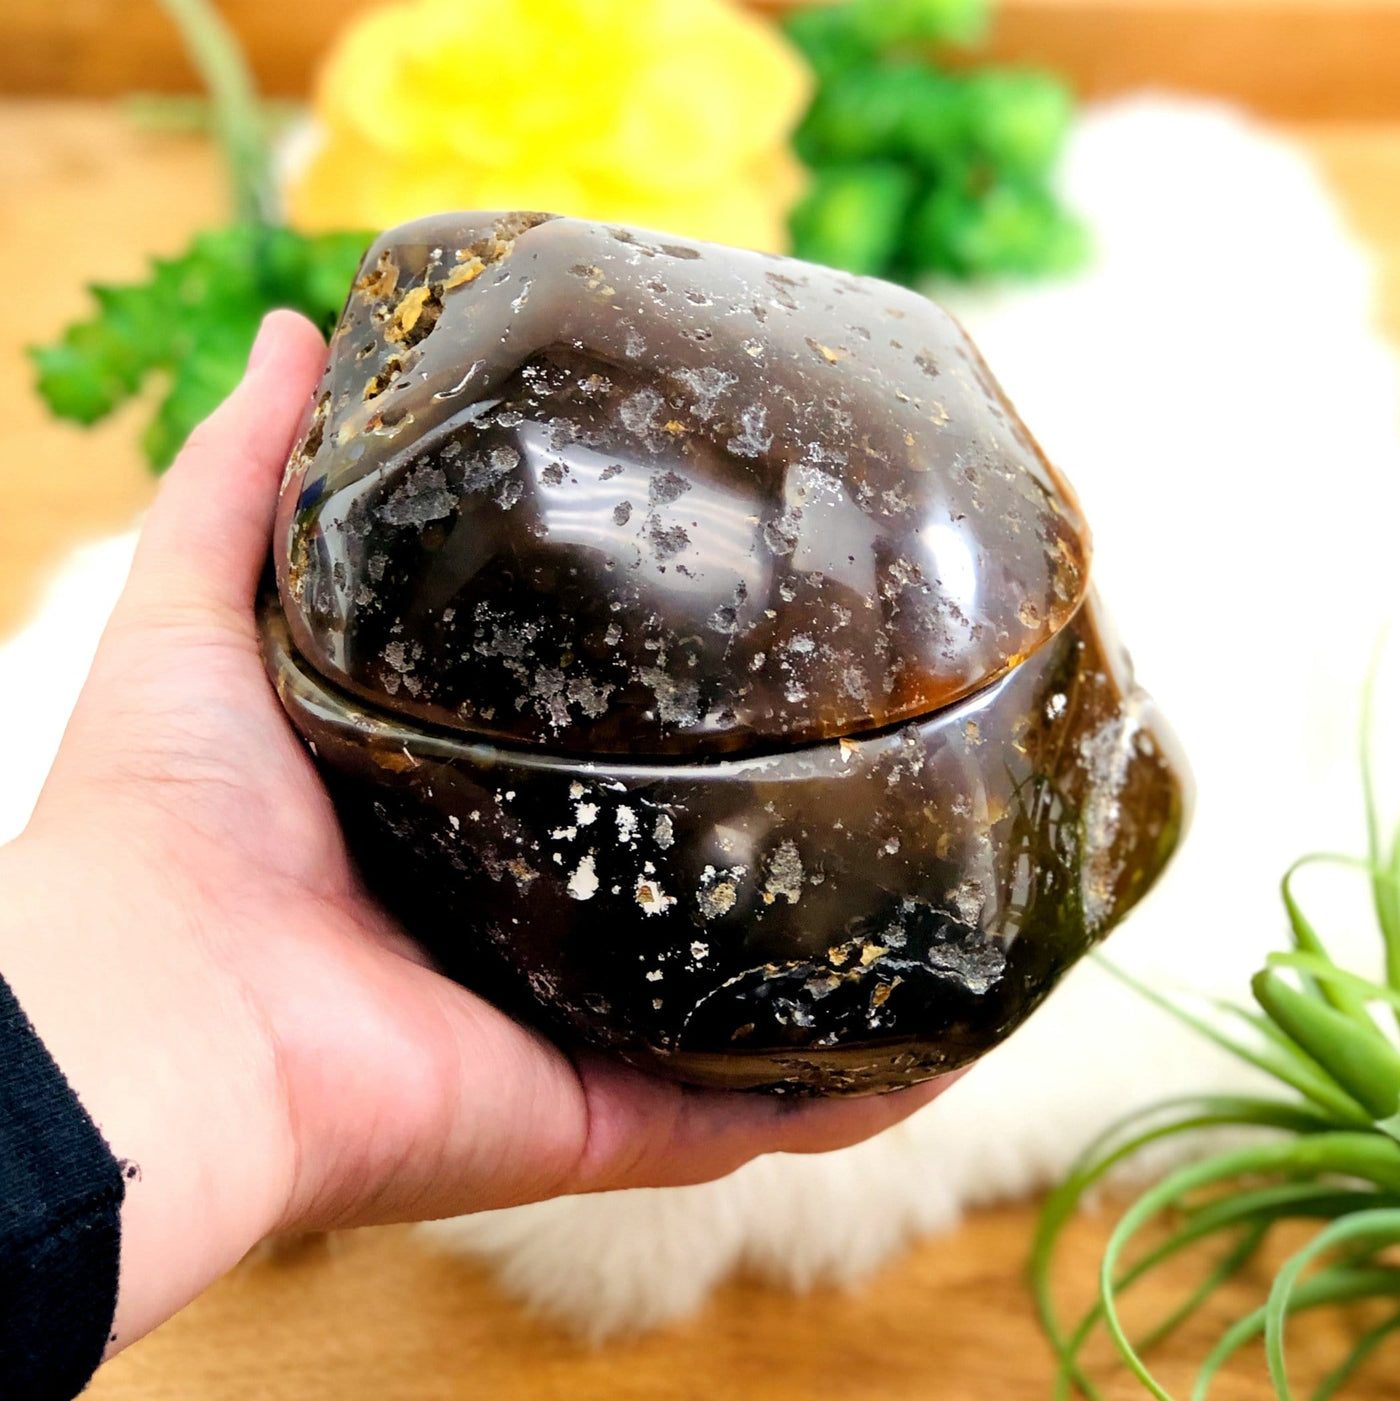 Polished agate druzy box closed in a hand displaying the external surface. Plants in the background.